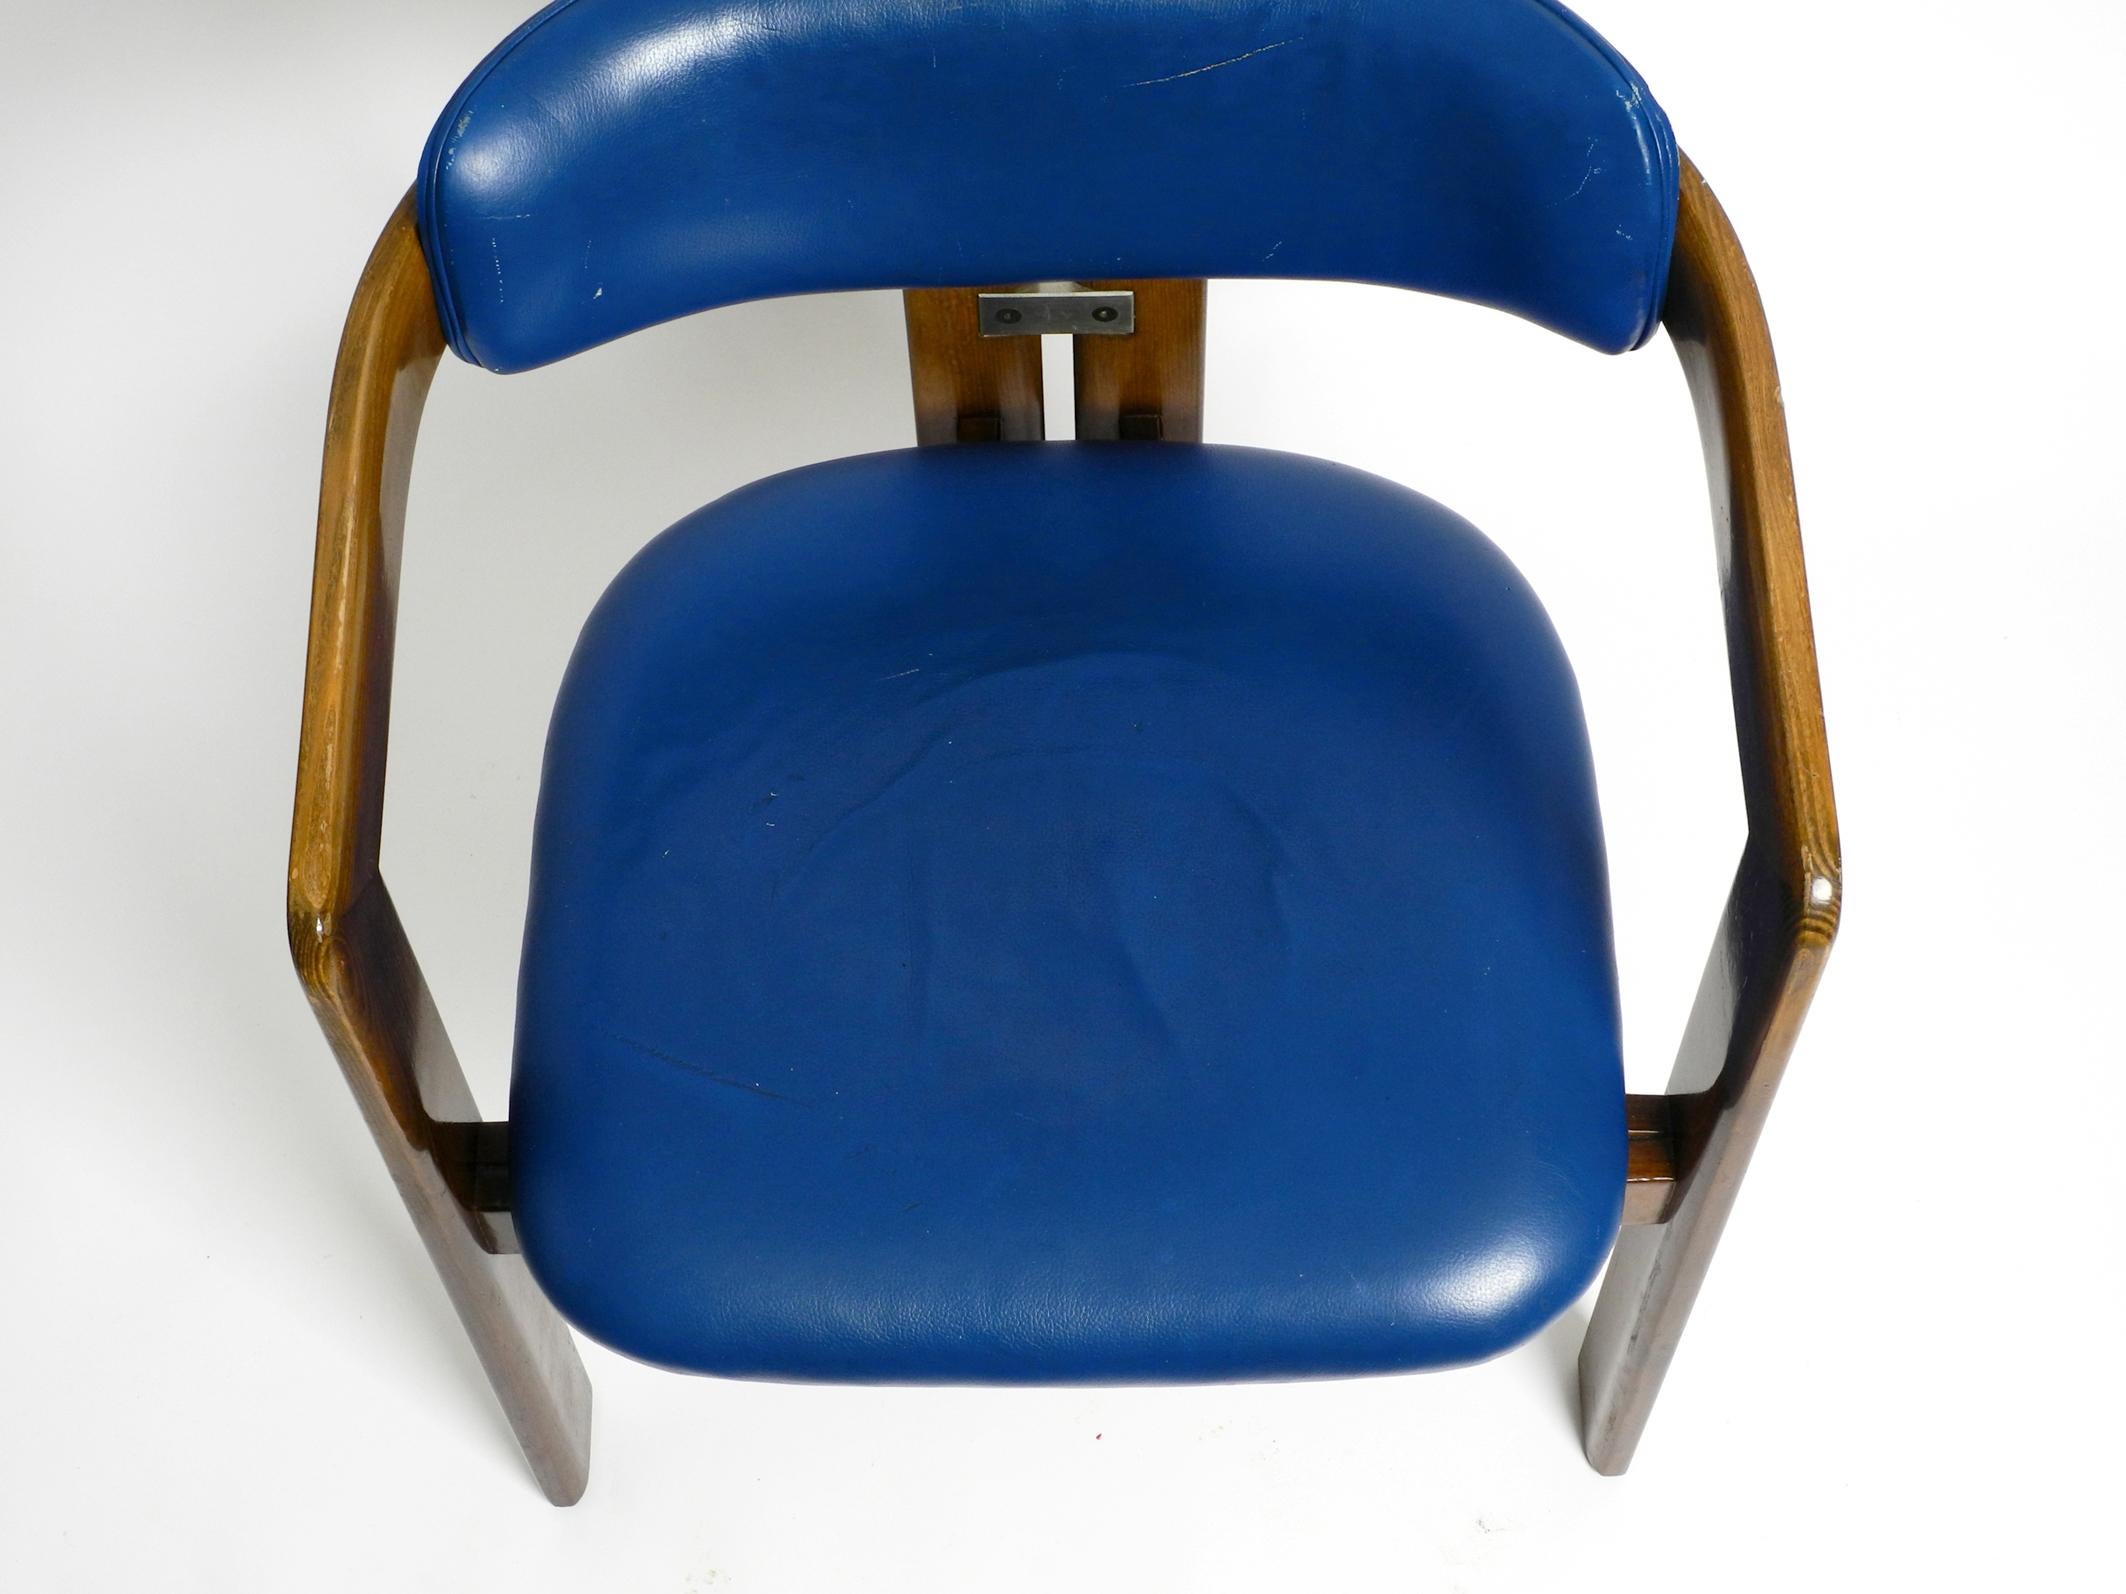 Pamplona Chair by Augusto Savini for Pozzi in Blue Leather Upholstery 1